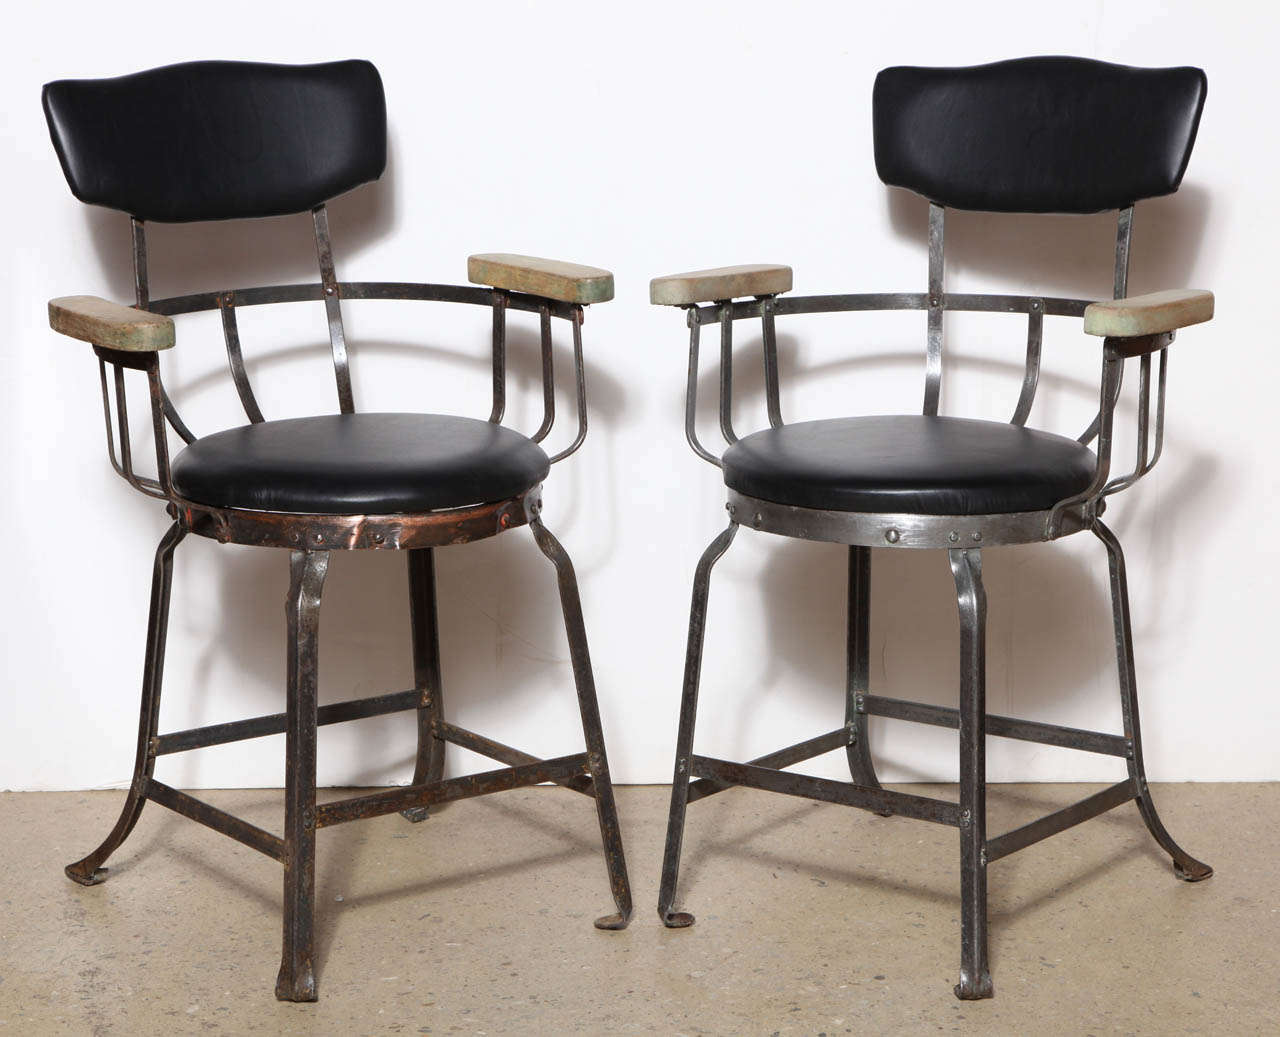 early sporting Brunswick Arm Chairs with riveted Steel construction, thick wooden Arm rests and rounded spring back. Seat and Back newly reupholstered in Black Leather.  Chairs possibly used in a Bowling Alley.  Paint removed. Great as comfortable